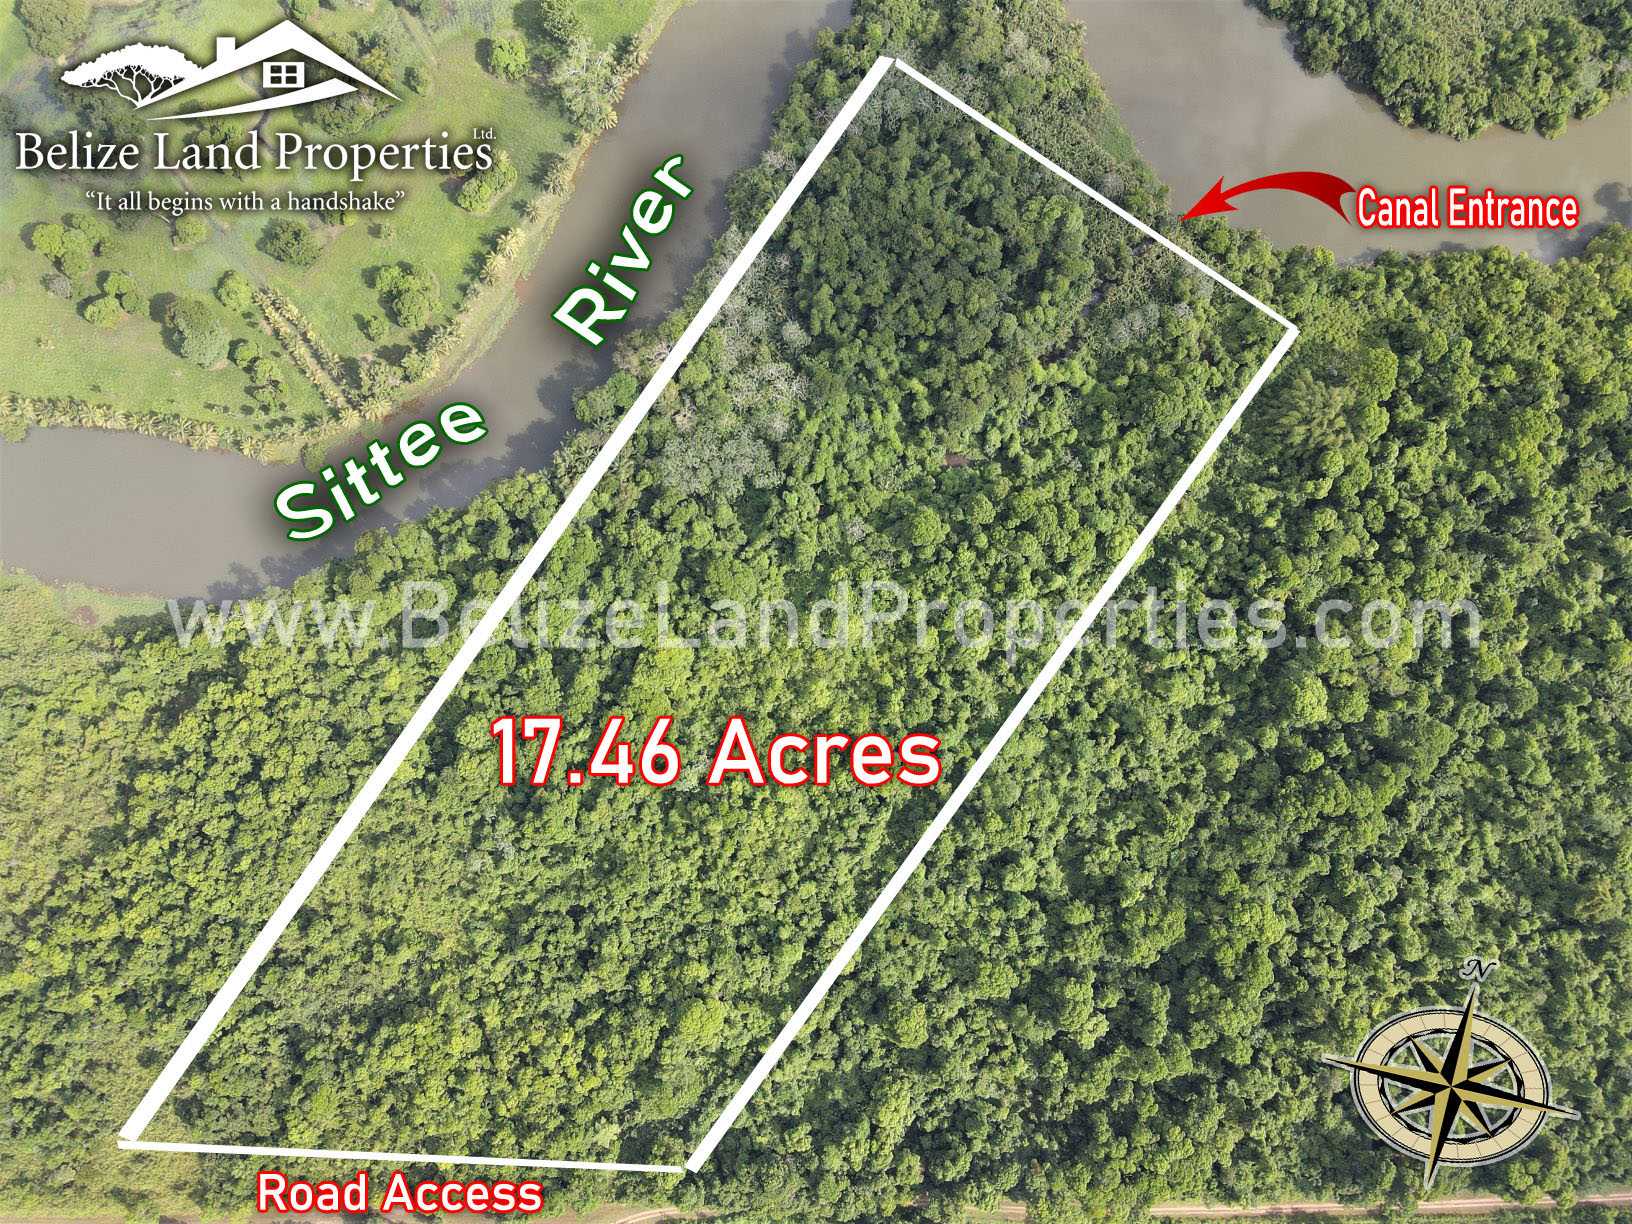 17.46 ACRES ON SOUTHERN BANKS OF SITTEE RIVER & MANMADE CANAL